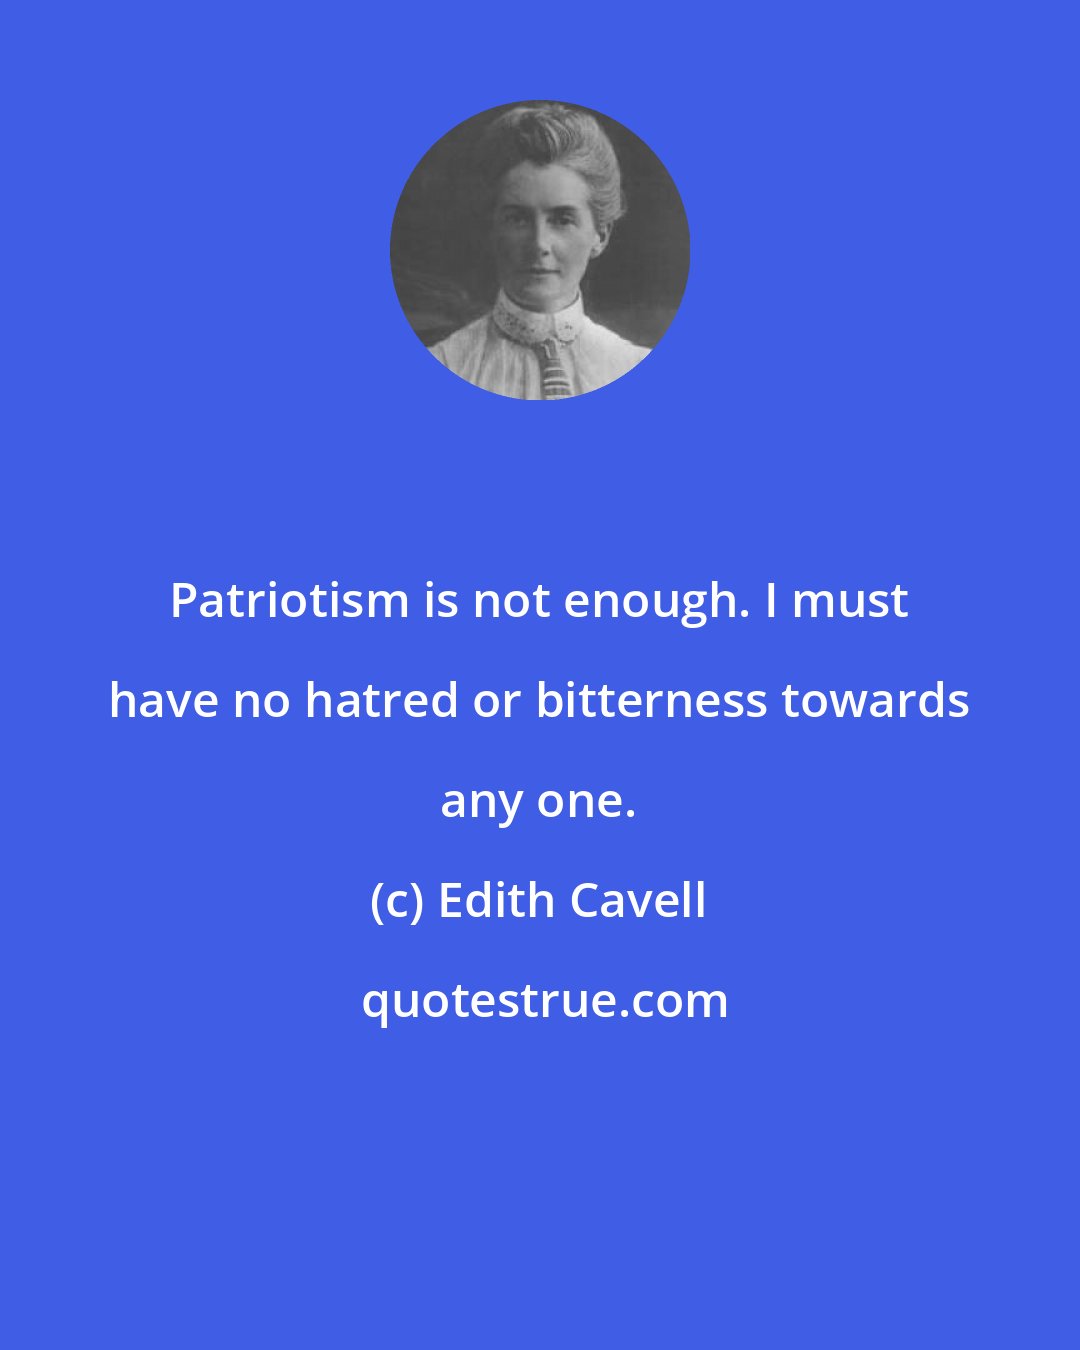 Edith Cavell: Patriotism is not enough. I must have no hatred or bitterness towards any one.